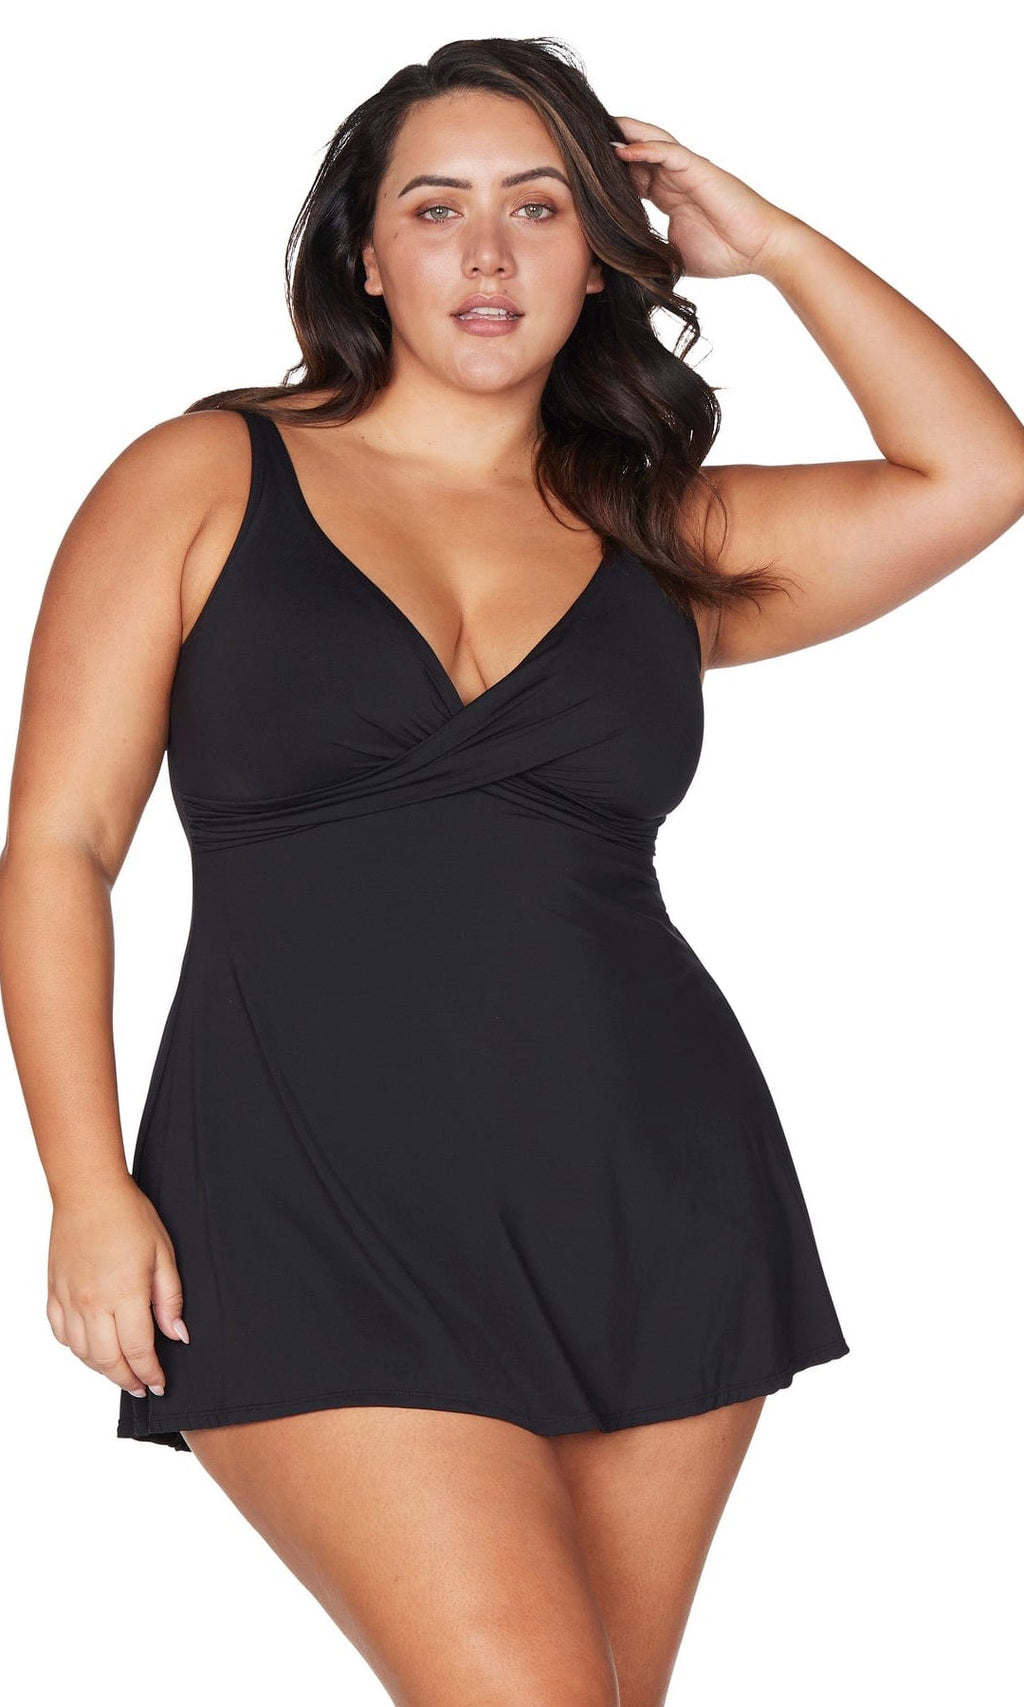 Swimdress Recycled Hues Black Delacroix, Multifit D Cup to G Cup